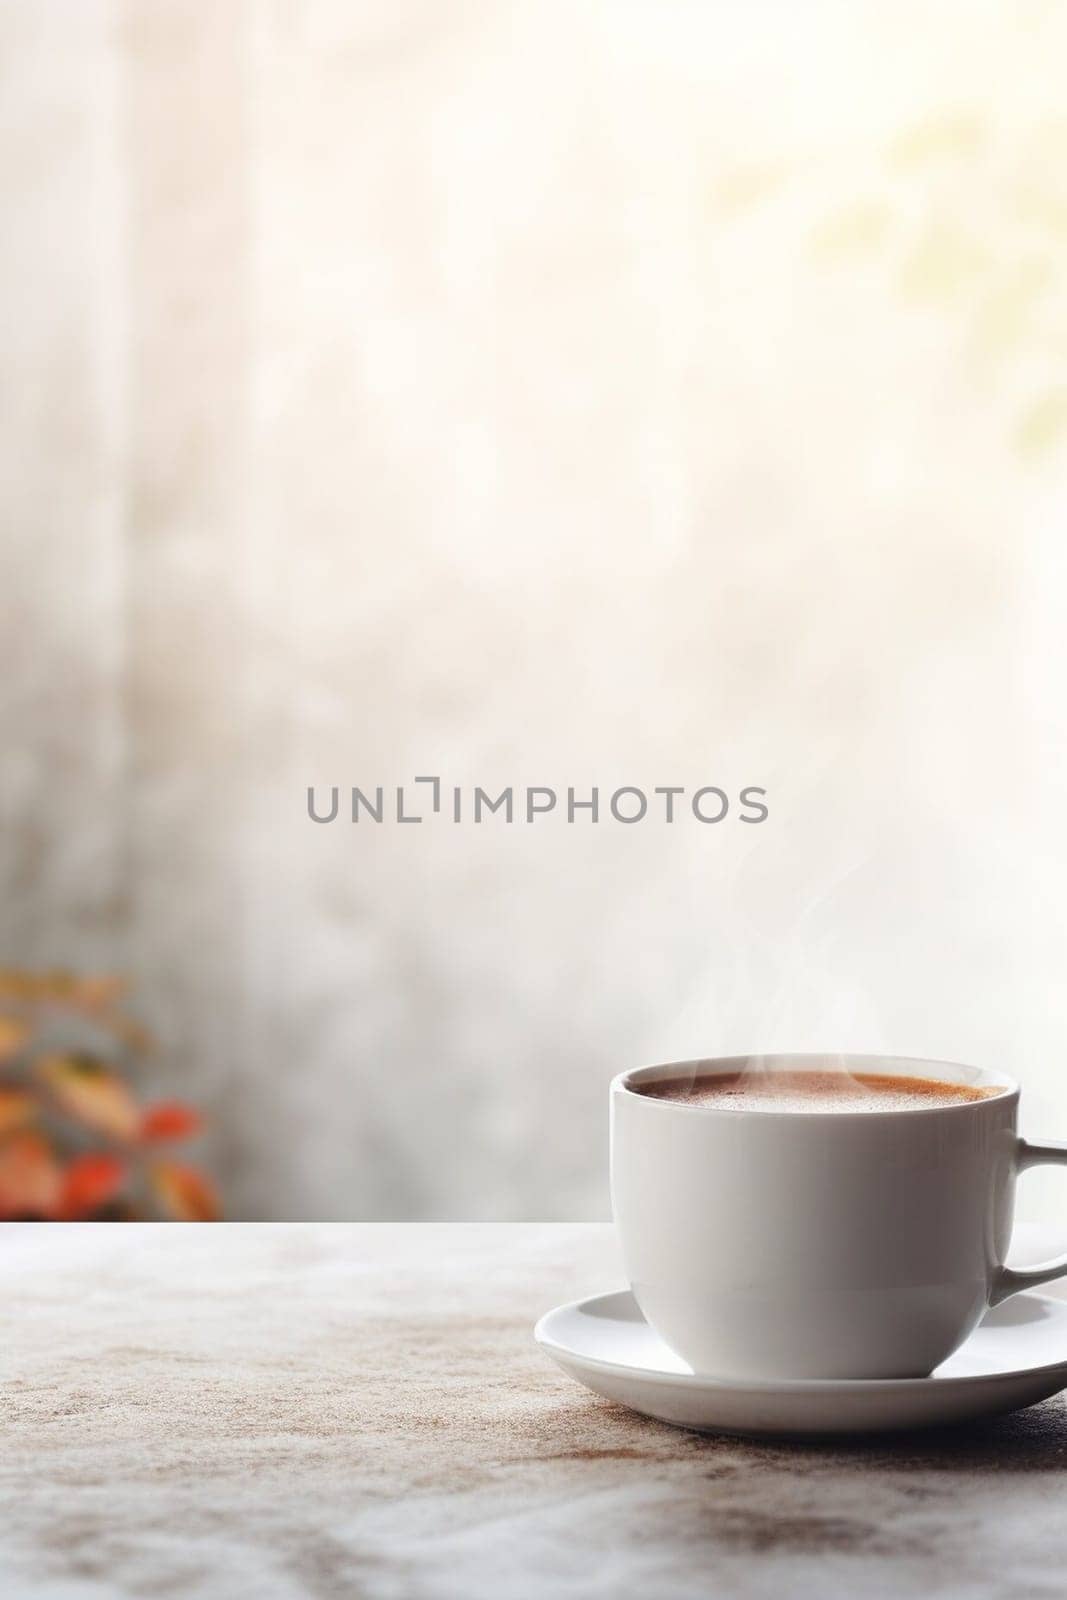 Latte, coffee or cappuccino mug on wooden table in a cafe, beautiful with natural light, vintage tones, food and drink. Copy space for text banner.